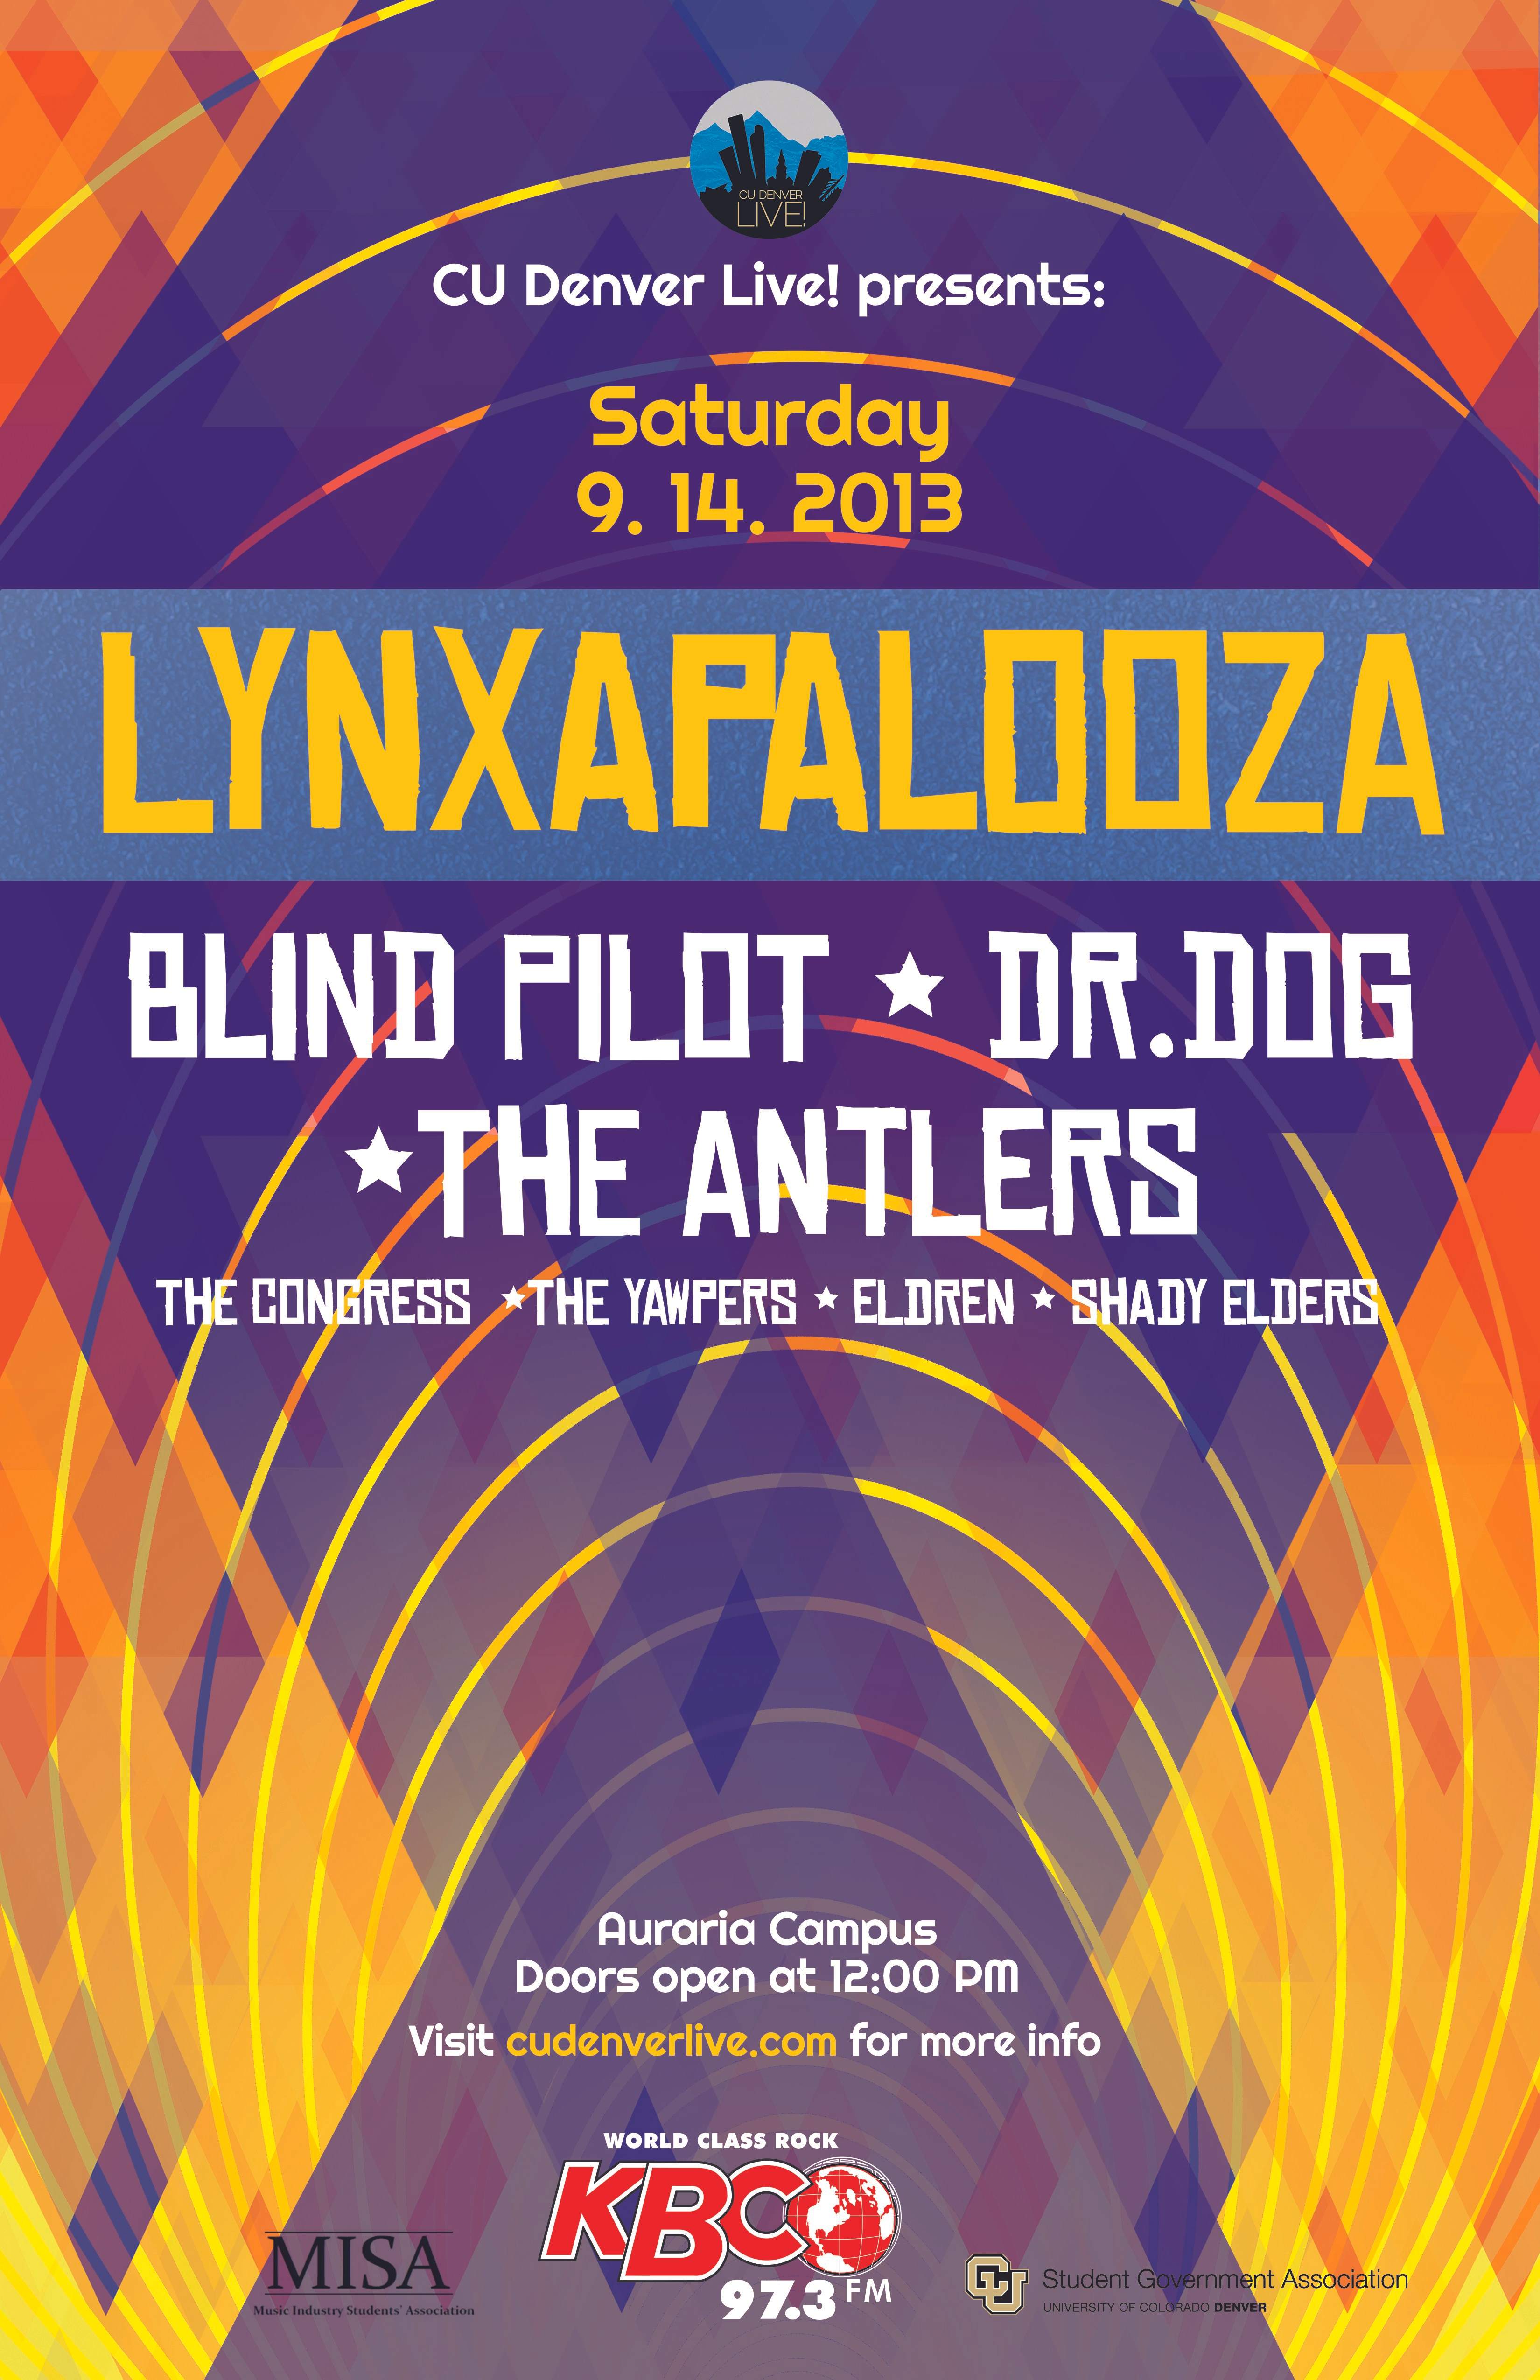 Lynxapalooza Feat. Blind Pilot, Dr. Dog, and The Antlers - Página frontal